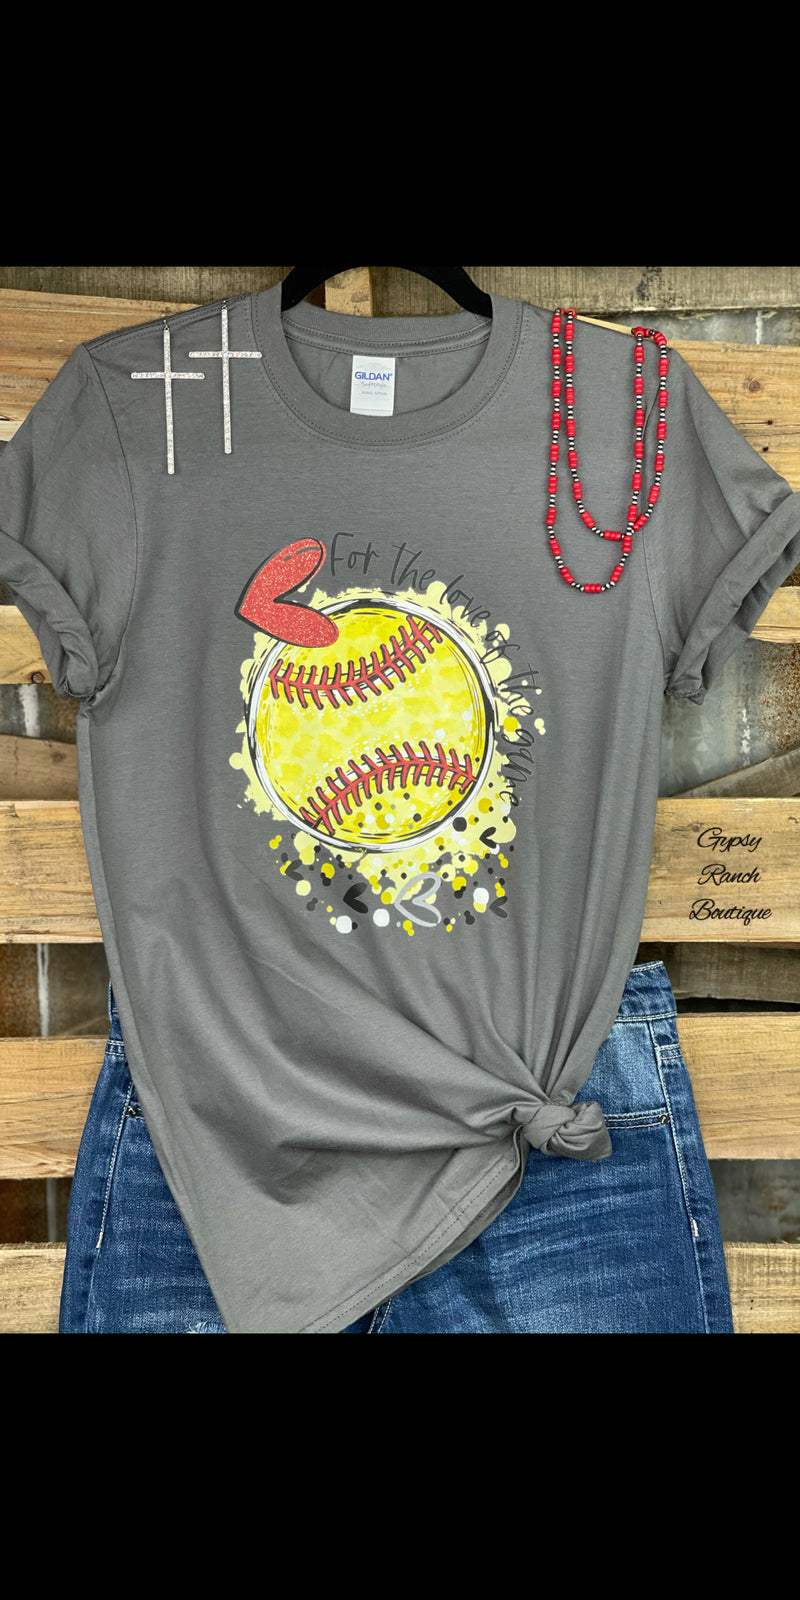 For The Love of The Game Softball Top - Also in Plus Size